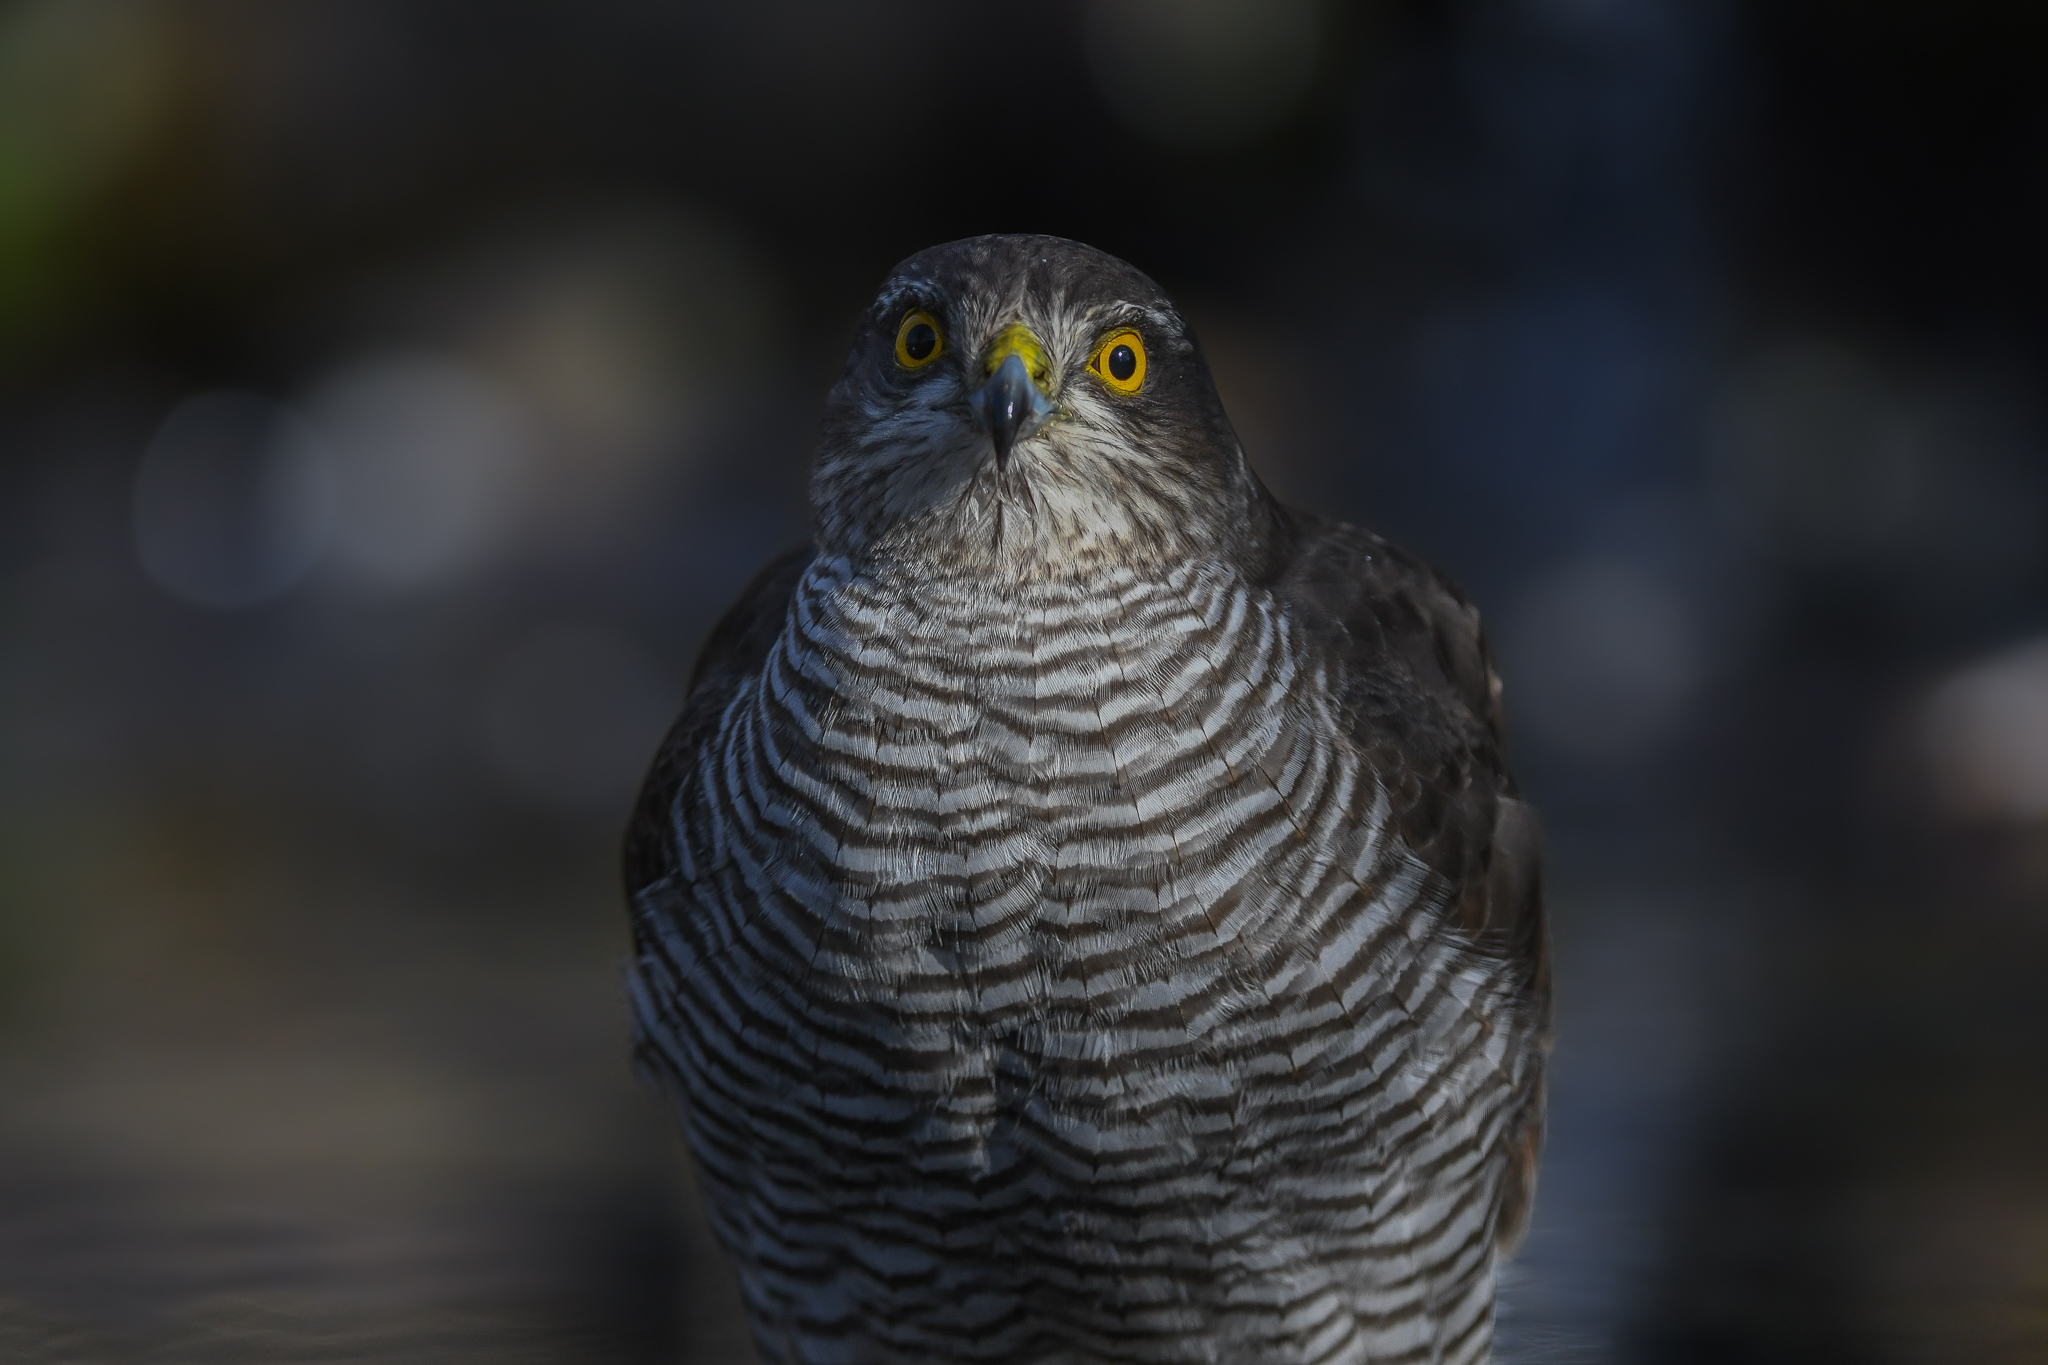 Face to face with the Sparrowhawk ...